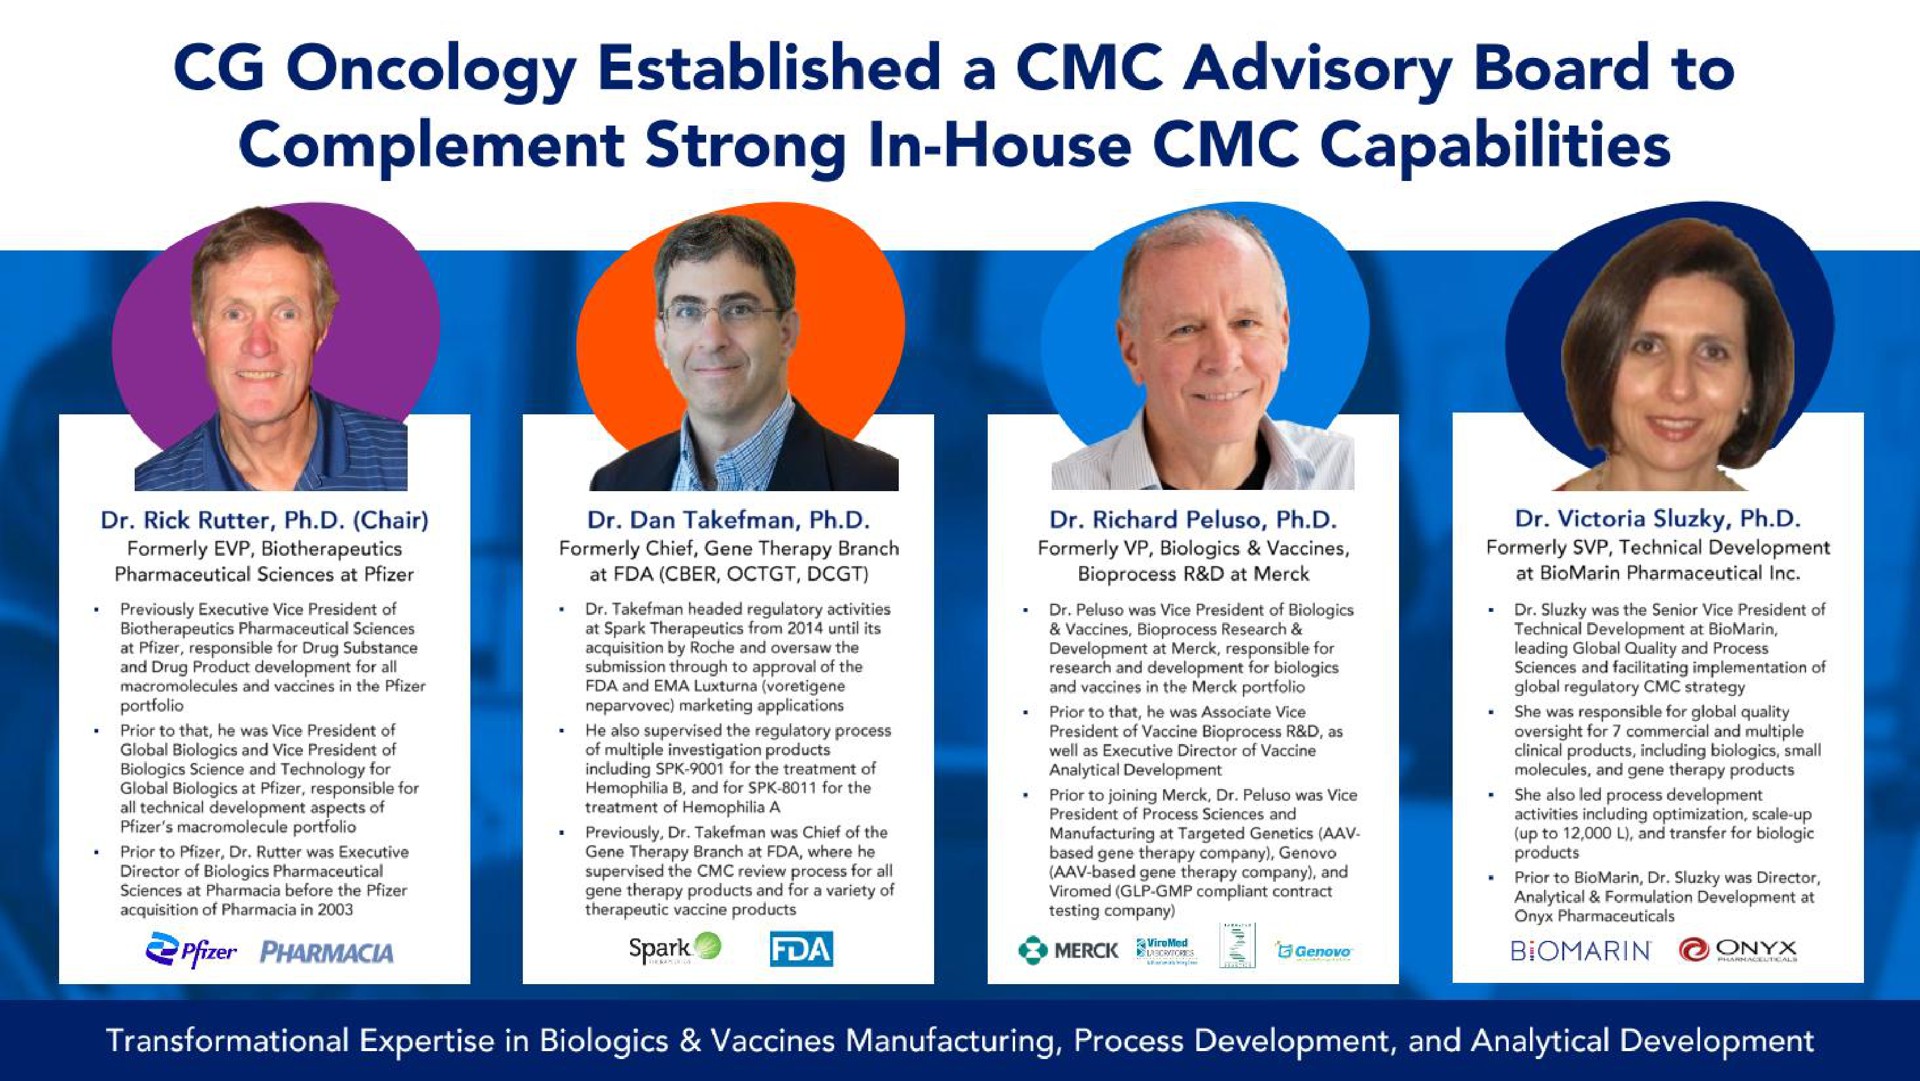 oncology established a advisory board to complement strong in house capabilities | CG Oncology